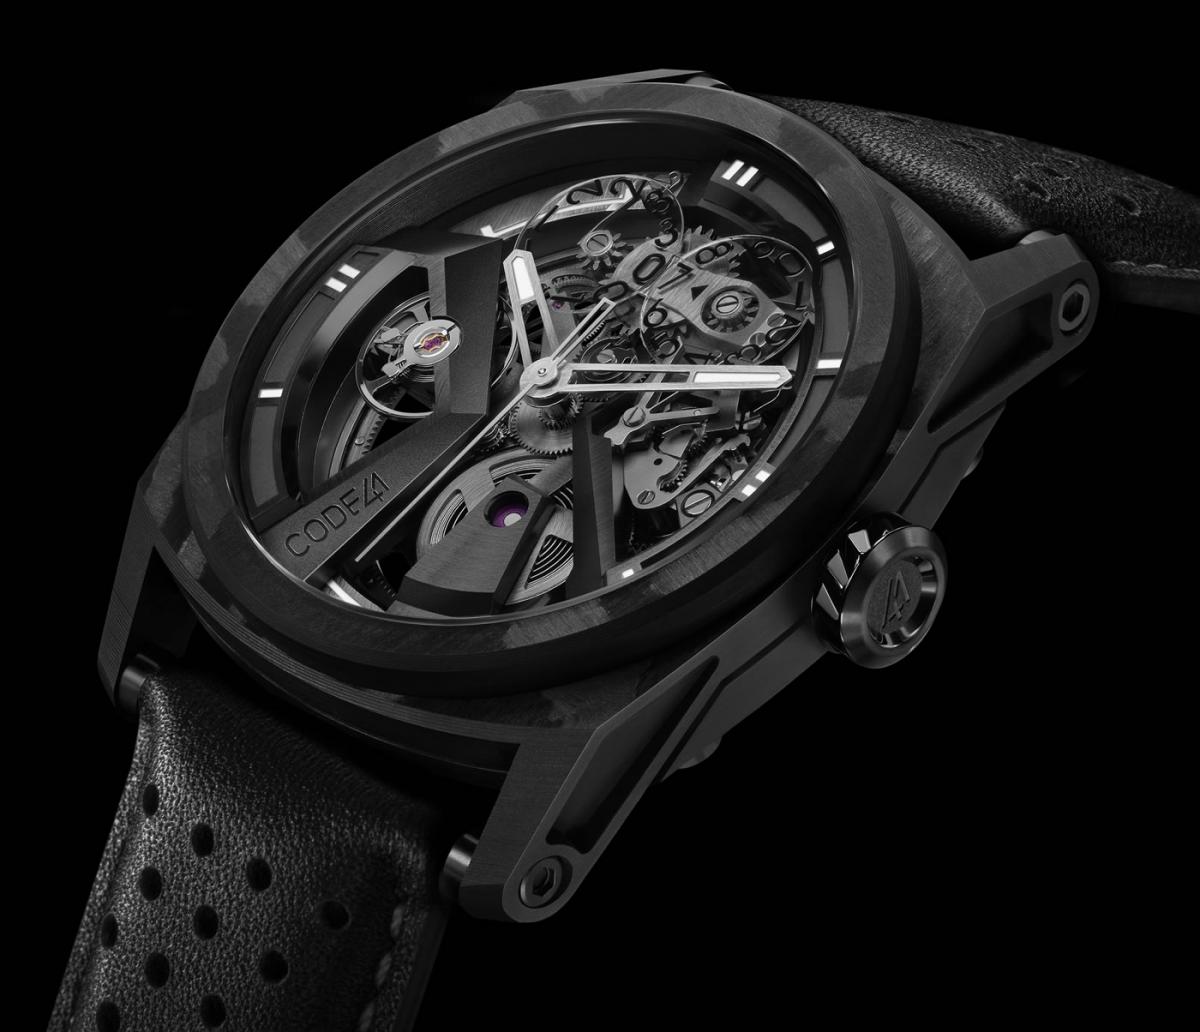 The much awaited CODEX41 Edition 4 timepiece is here and it?s called the AeroCarbon